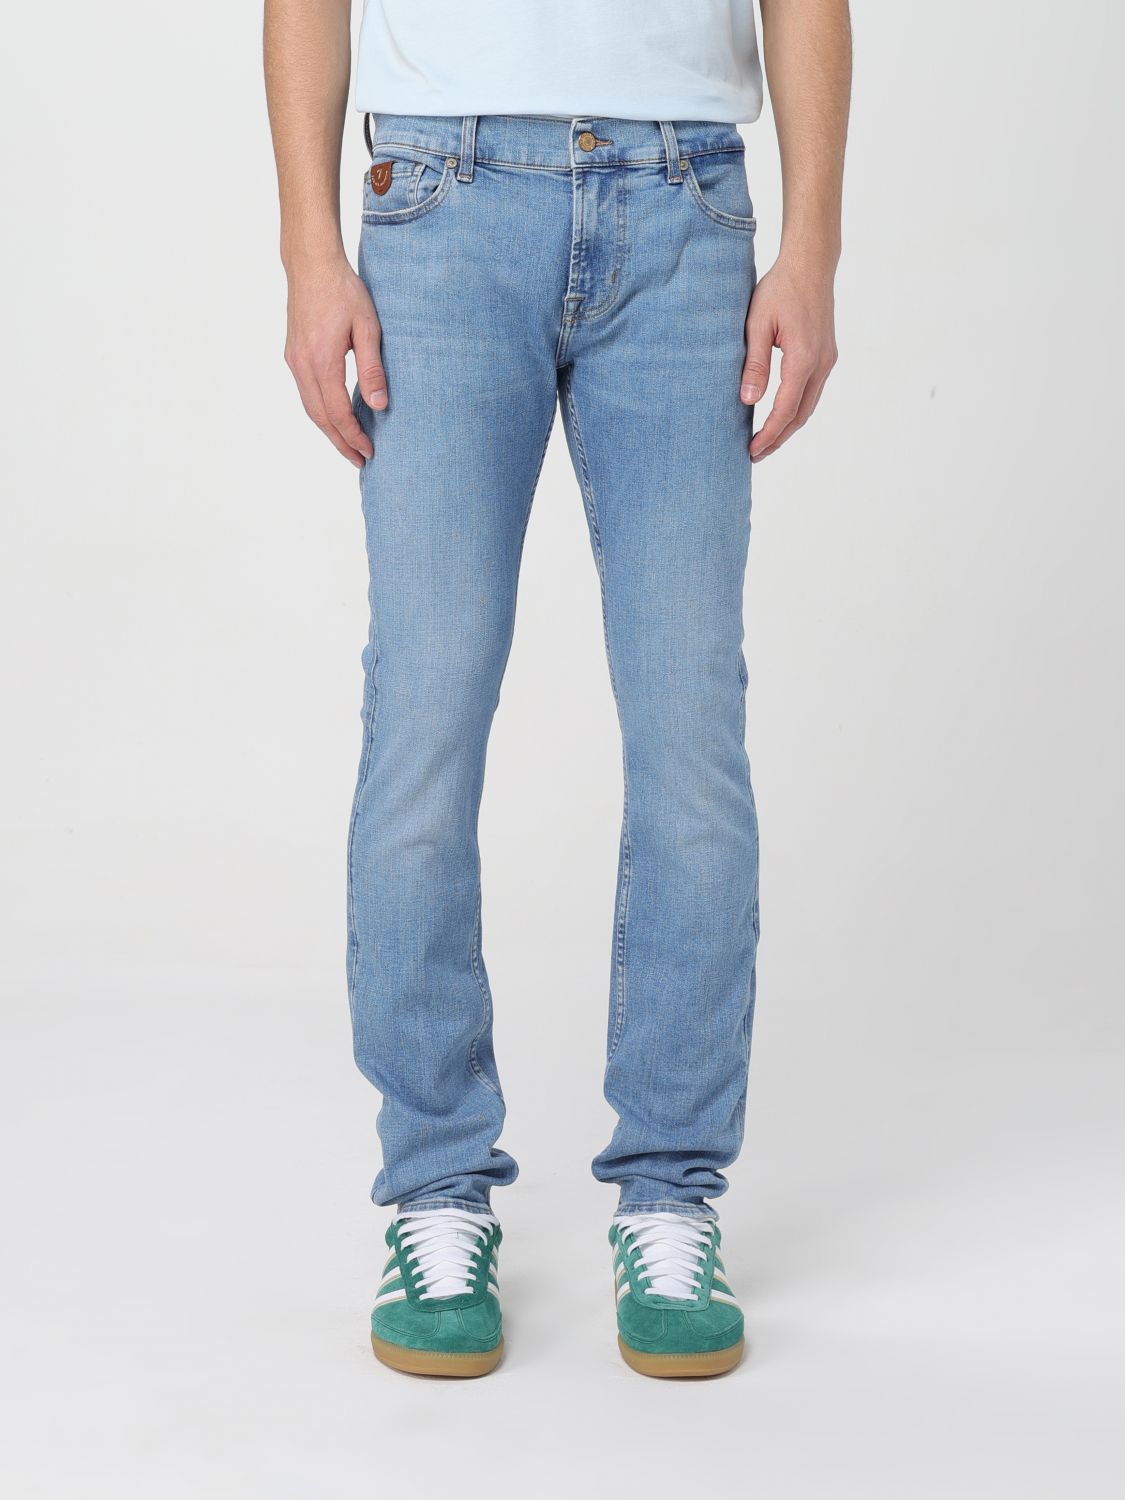 jeans 7 for all mankind men colour gnawed blue